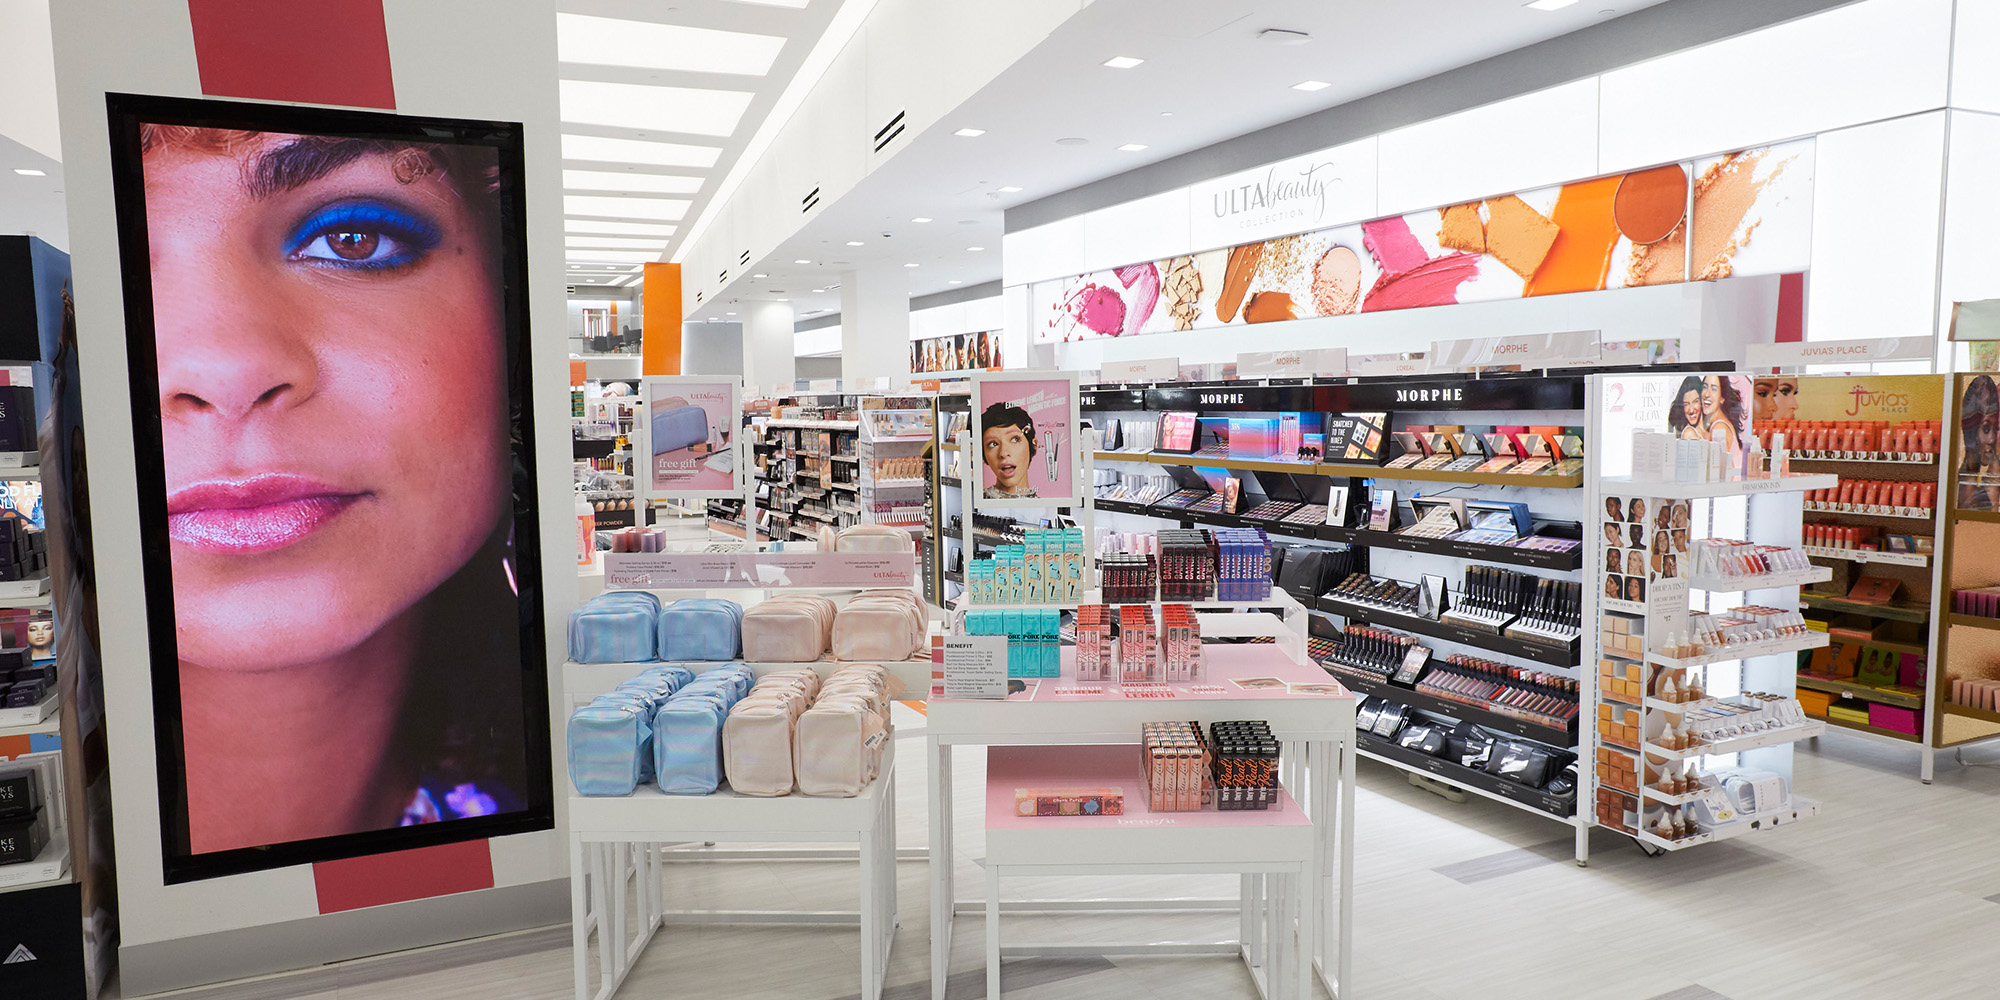 Mexico’s Multibillion-Dollar Draw To American Beauty Retailers